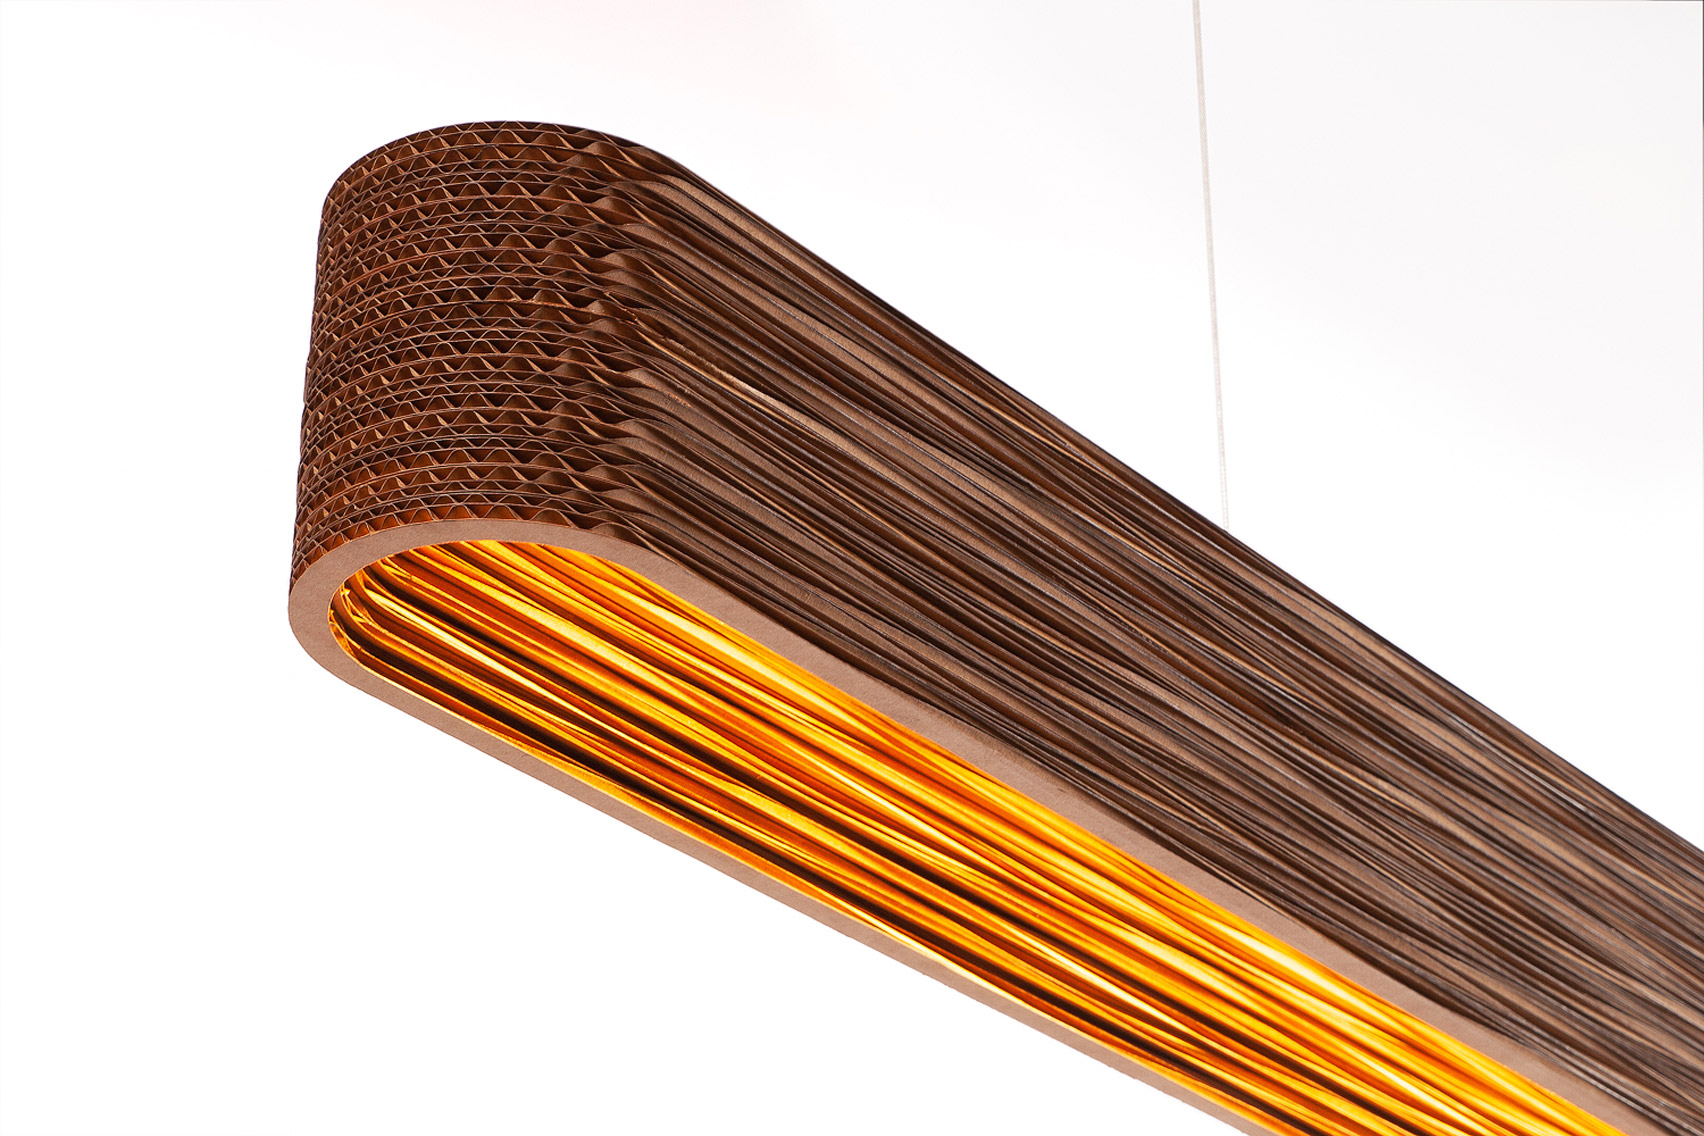 Dash Linear lighting by Graypants in close-up showing the layers of cardboard